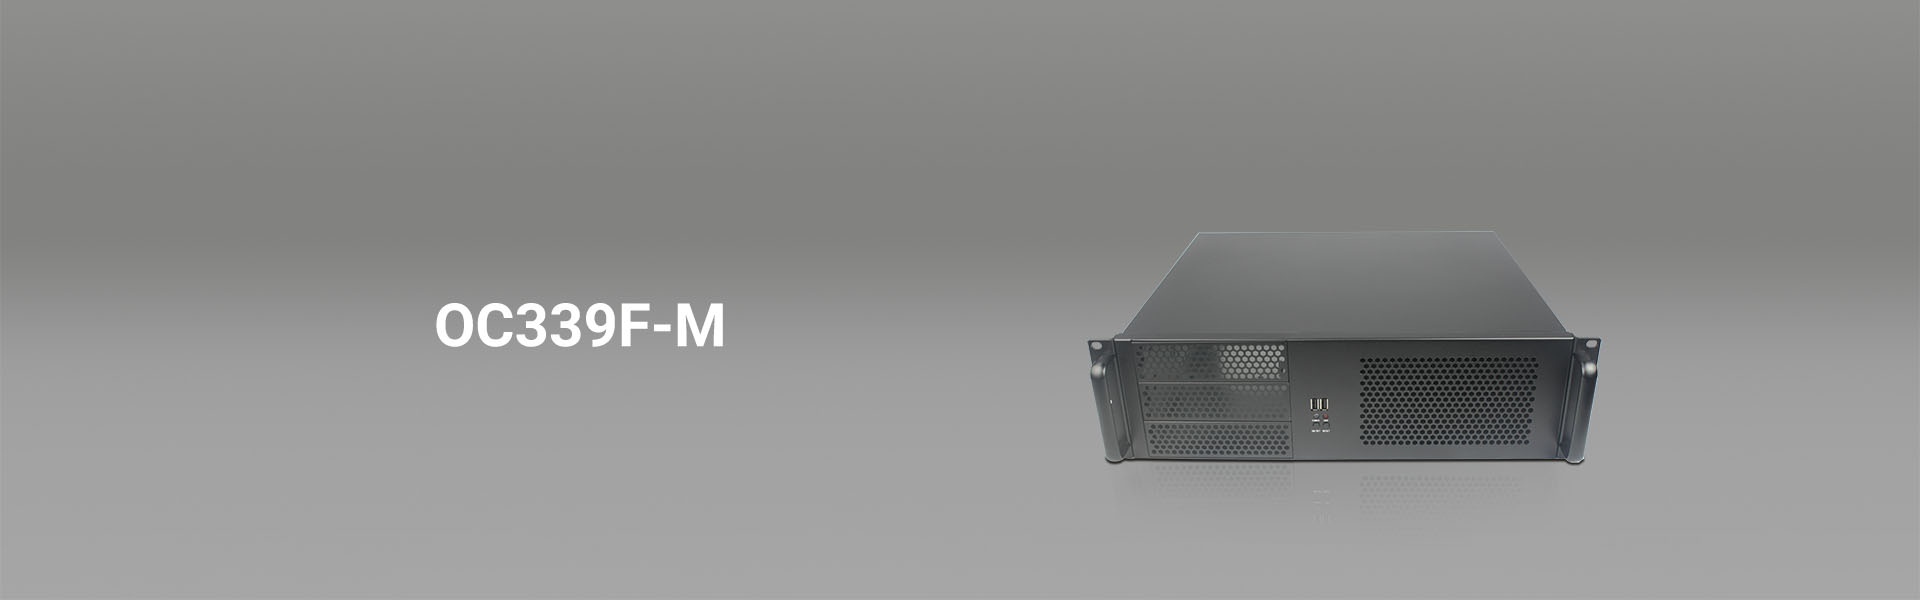 rackmount chassis-OC339F-M onechassis-banner